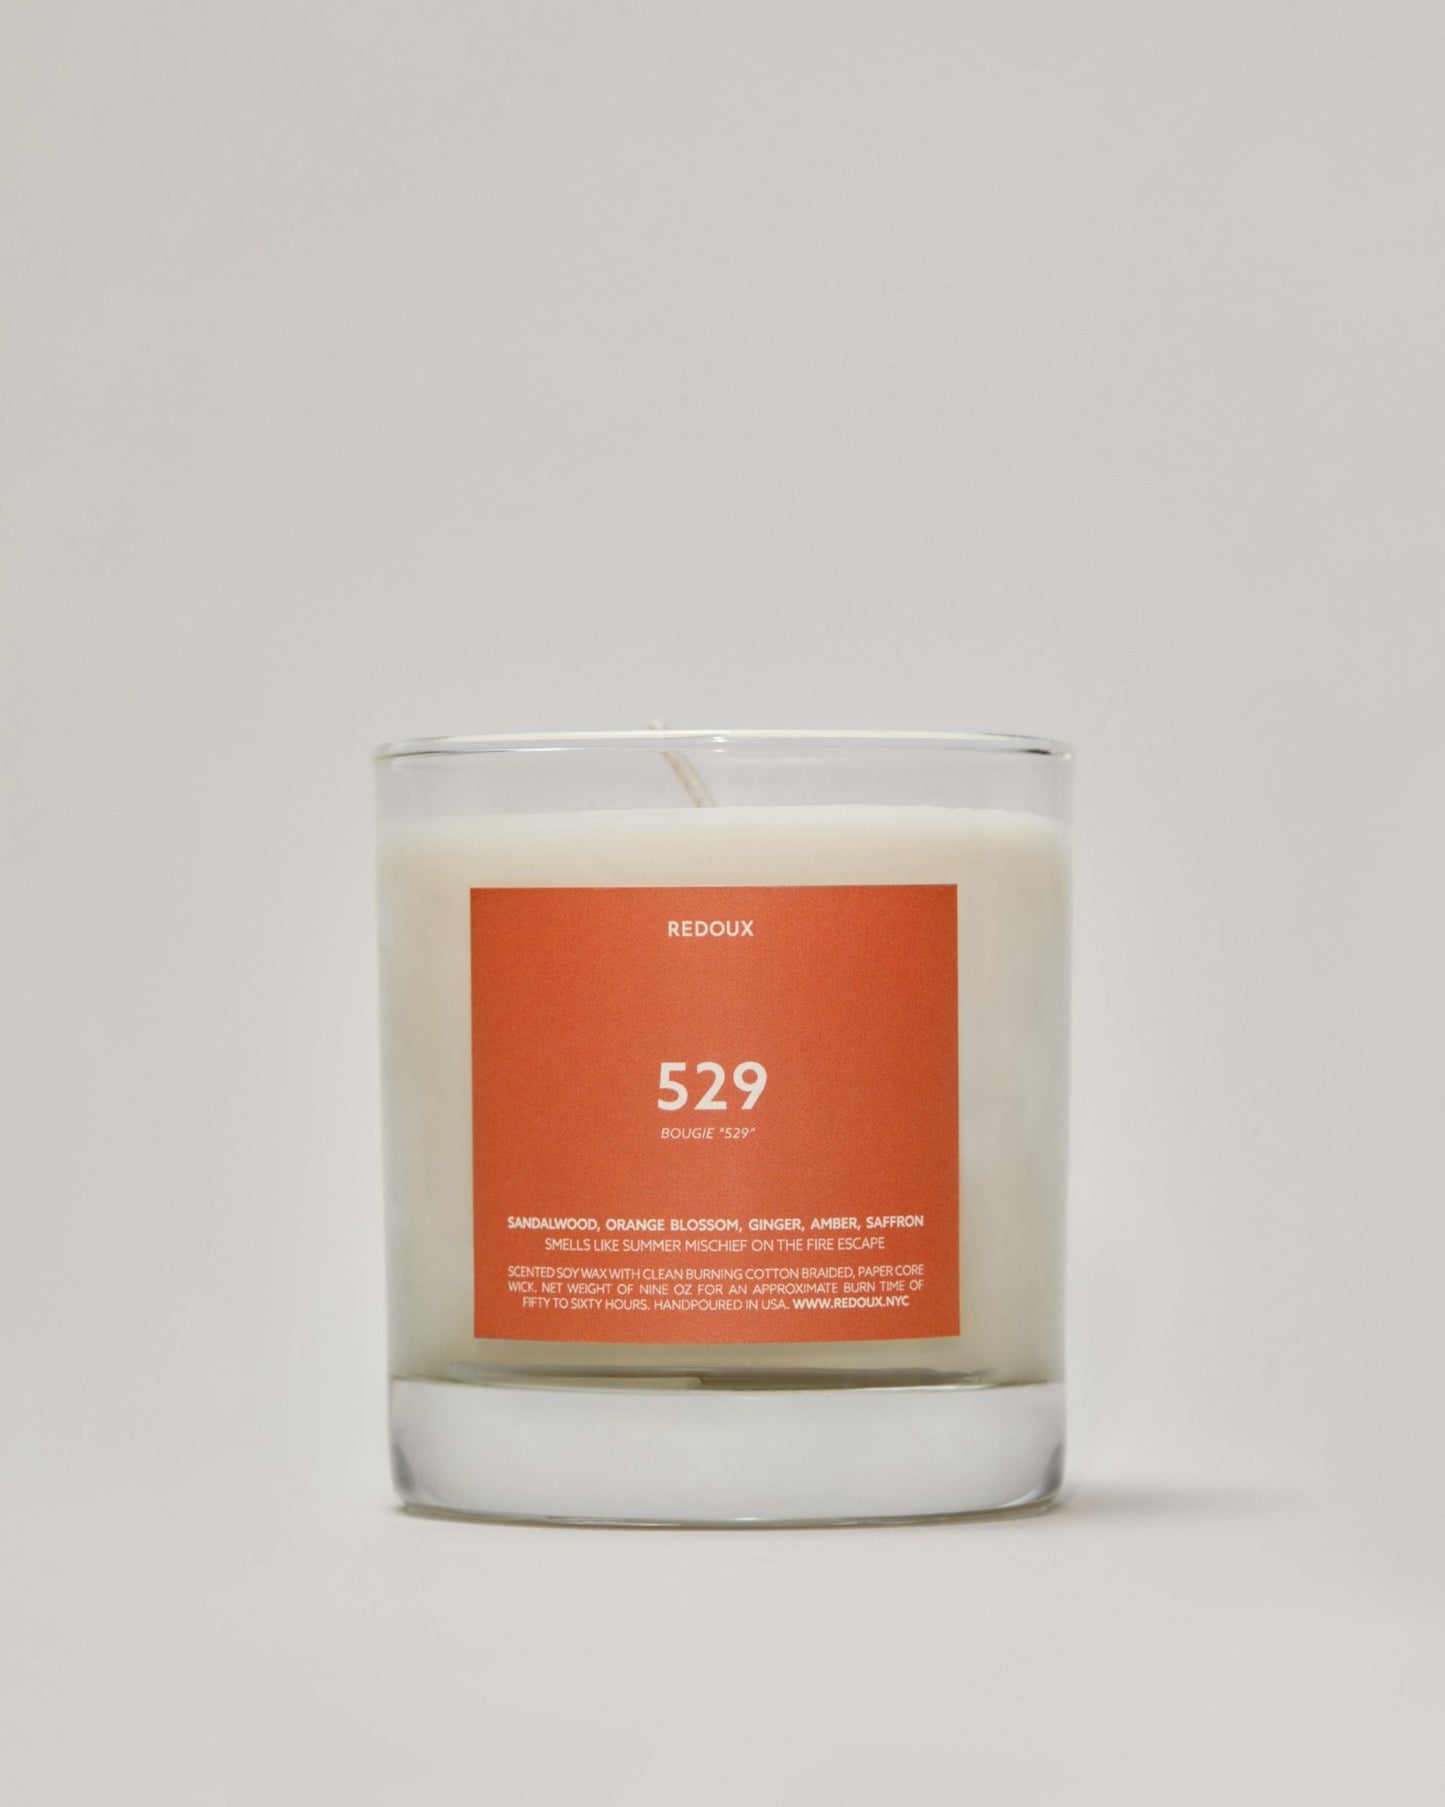 Candle "529" - Redoux